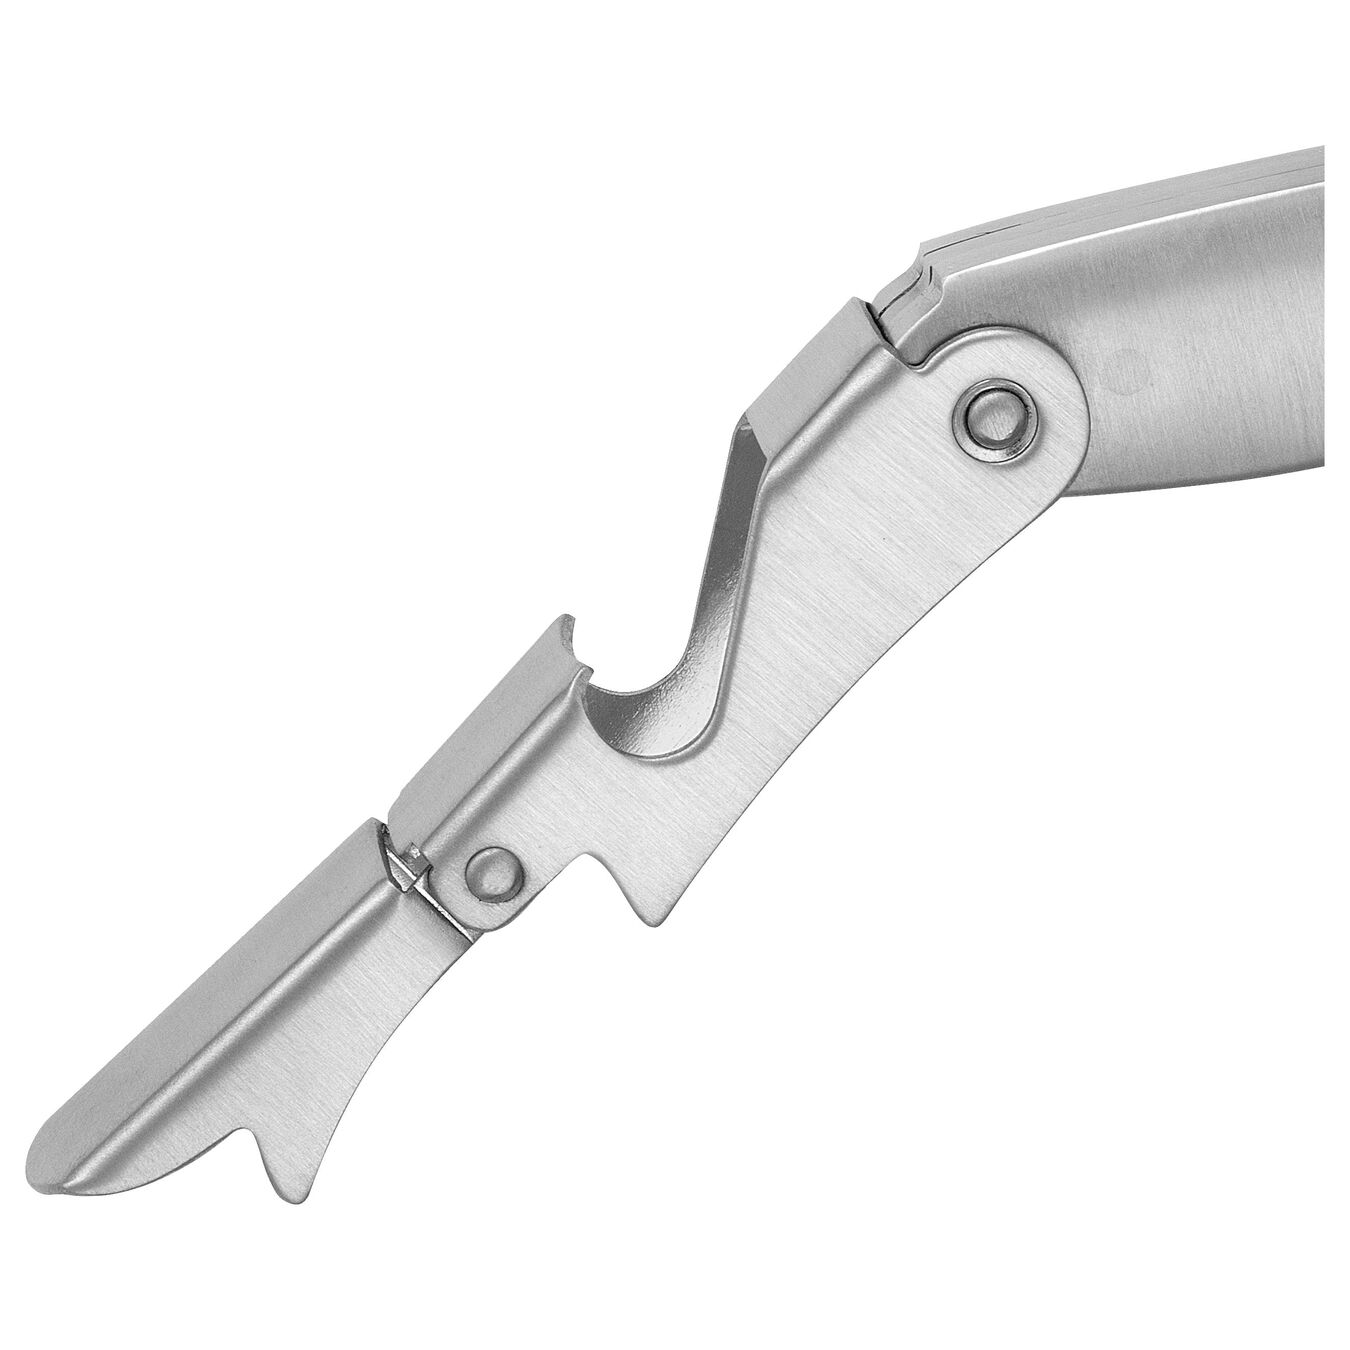 Skin Staple Remover Market Analysis, Trends, Development and Growth Opportunities by Forecast 2032